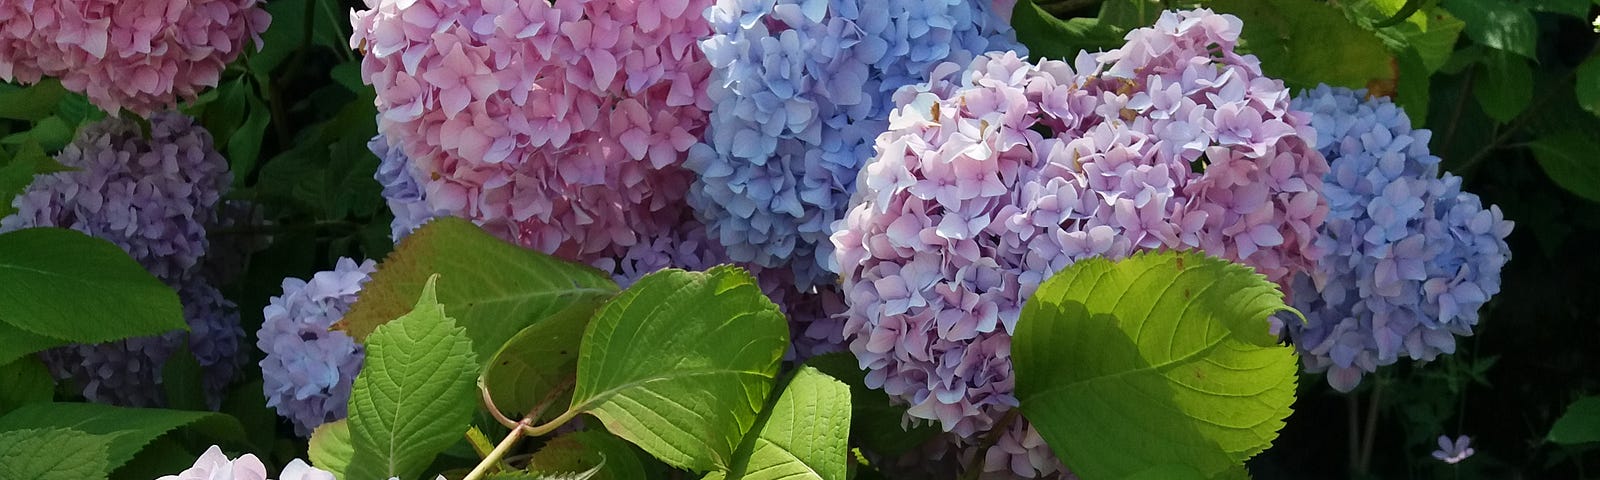 Some pink and violet hydrangeas.